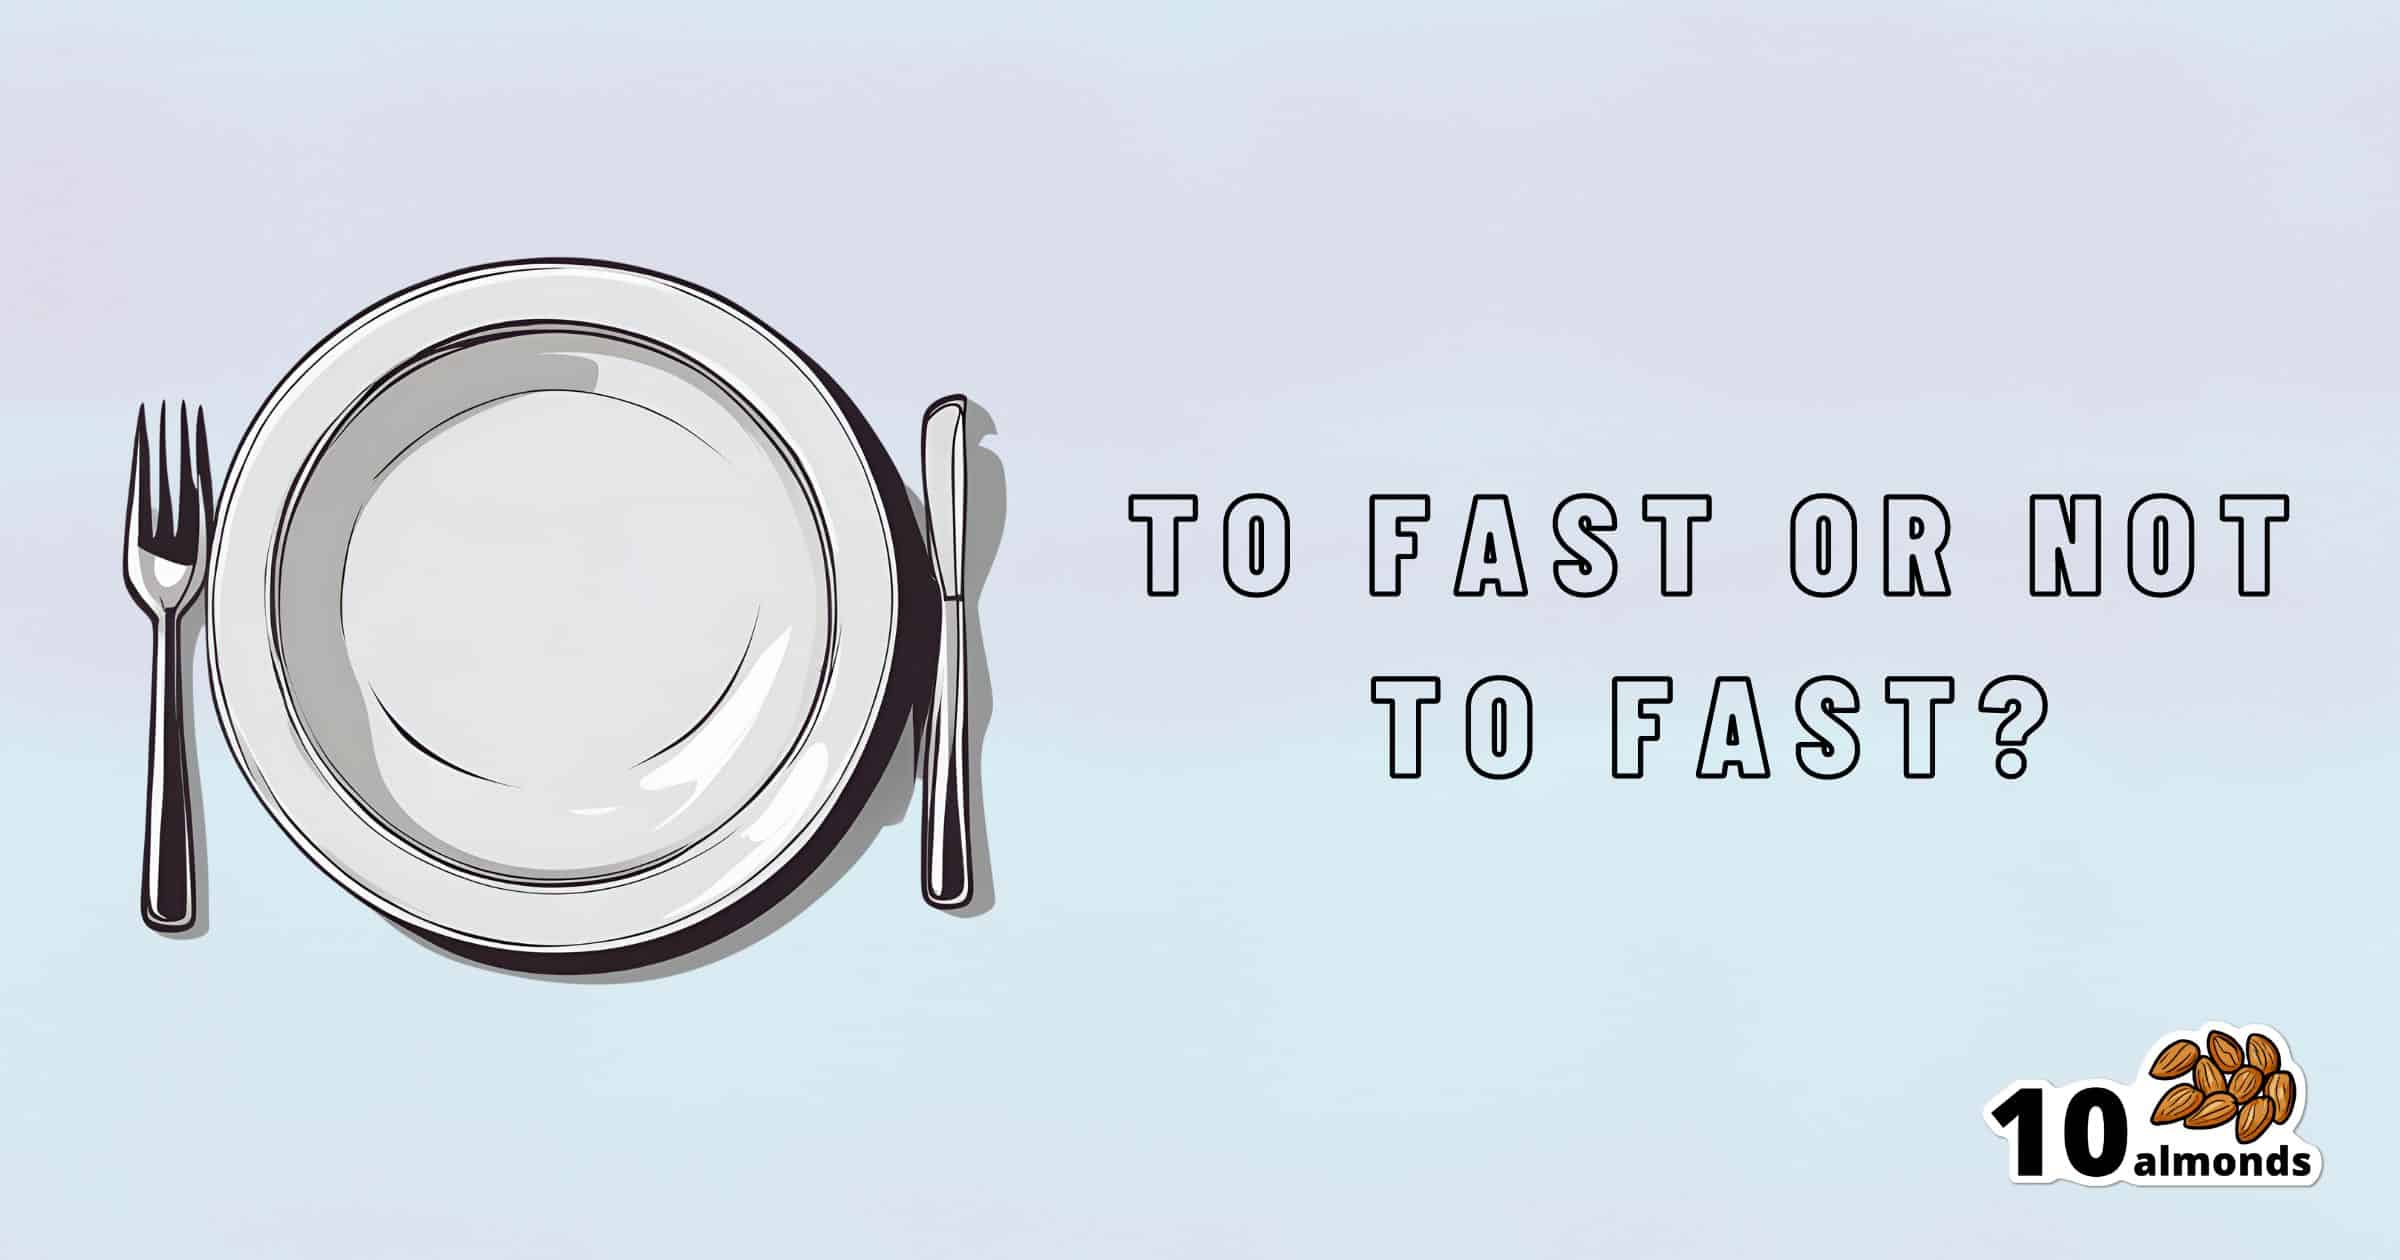 Illustration of an empty plate with a fork on the left and text above reading "INTERMITTENT FASTING: TO FAST OR NOT TO FAST?" With a logo of 10 almonds at the bottom right.